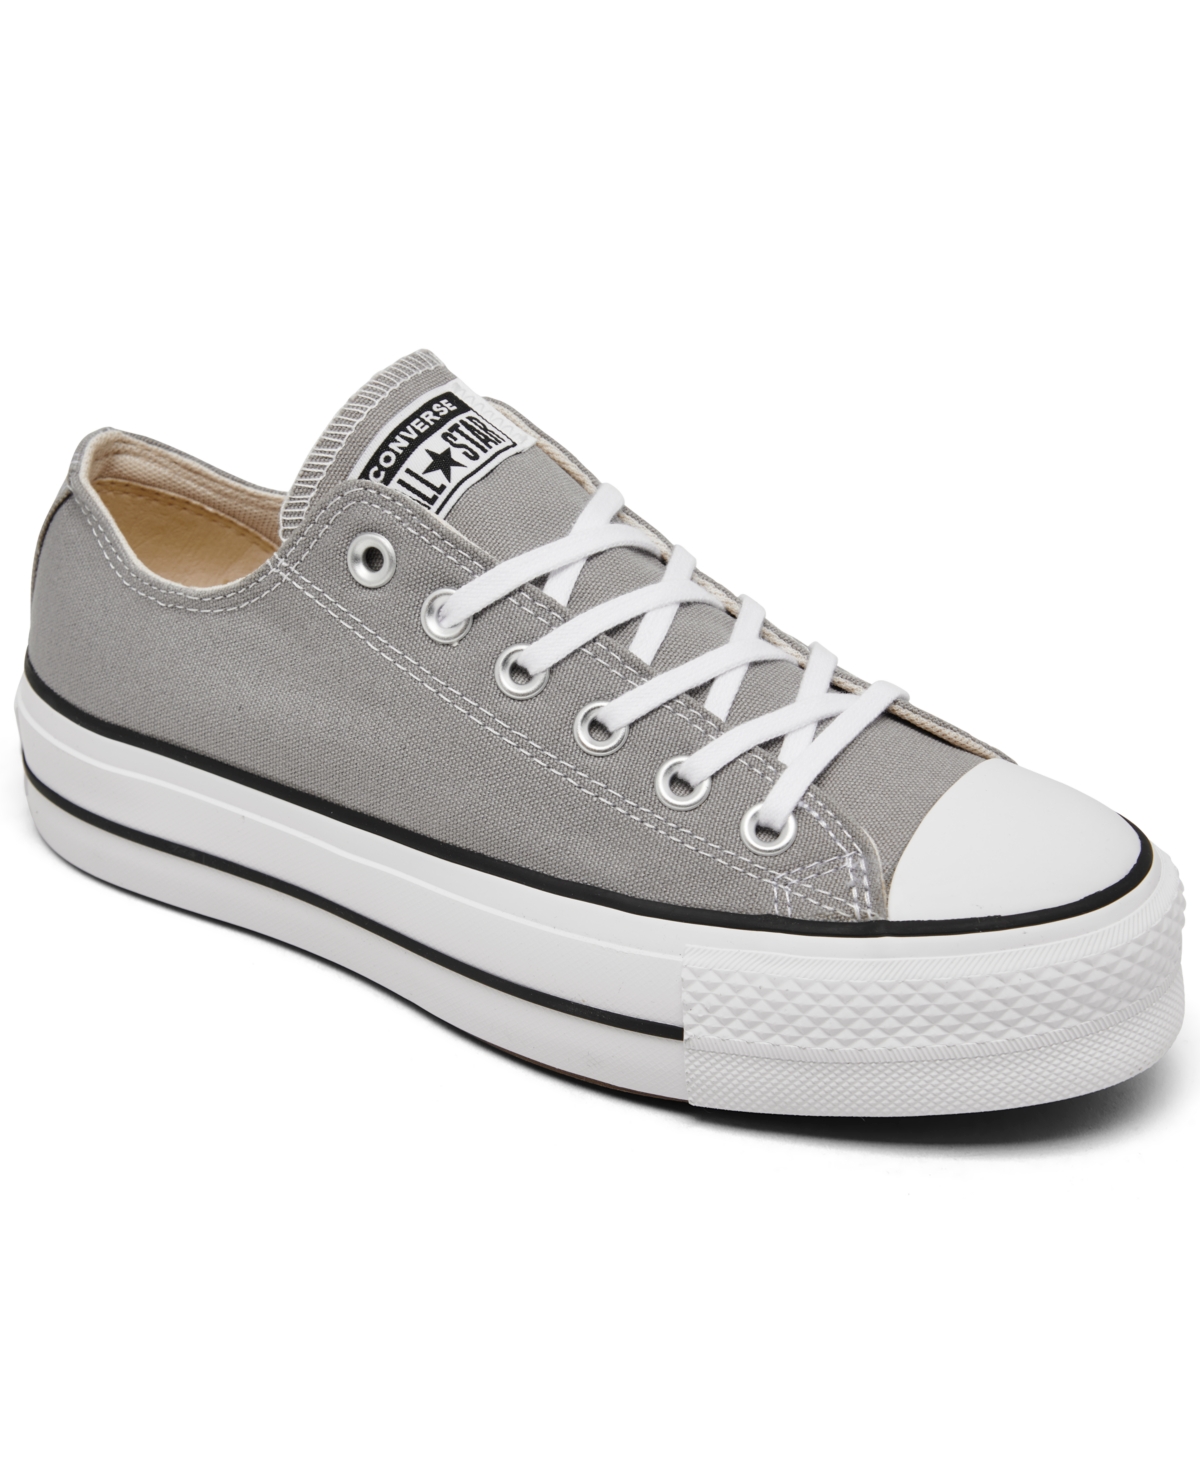 Women's Chuck Taylor All Star Lift Ox Low Top Platform Casual Sneakers from Finish Line - TOTALLY NEUTRAL